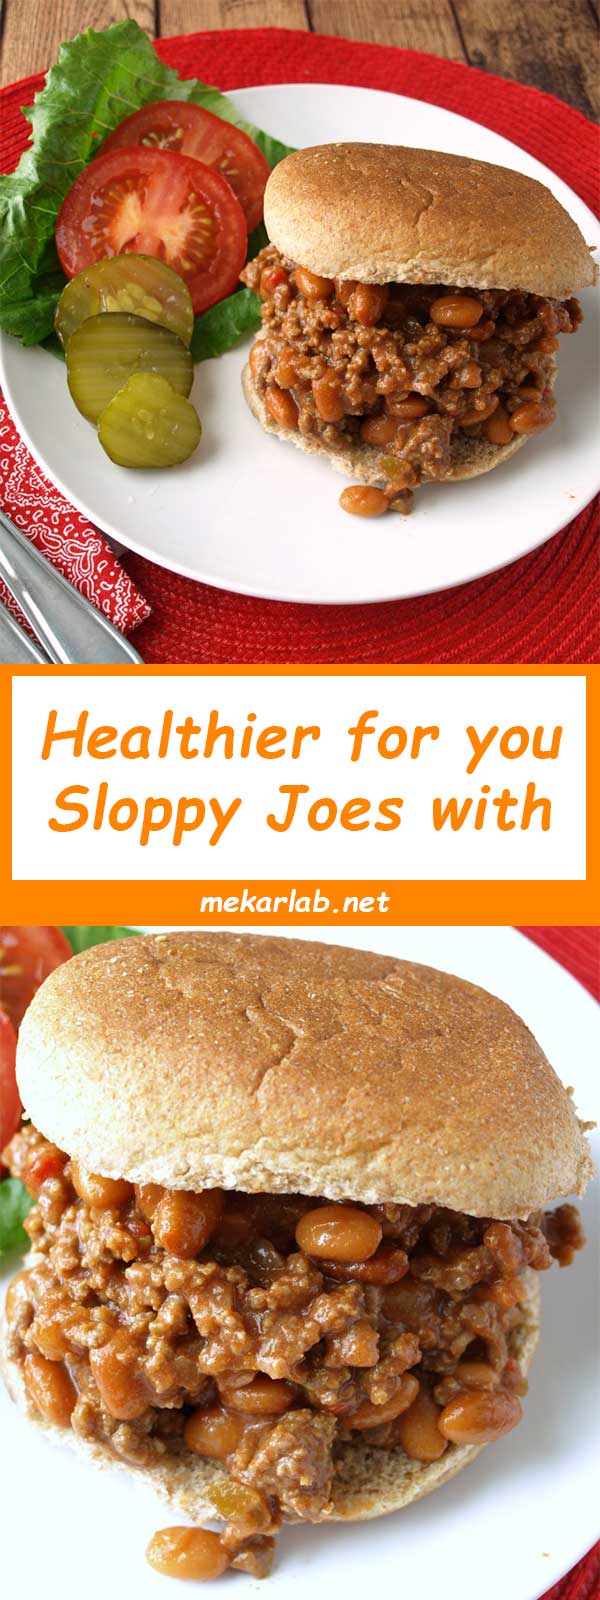 Healthier-for-you-Sloppy-Joes-with-Beans